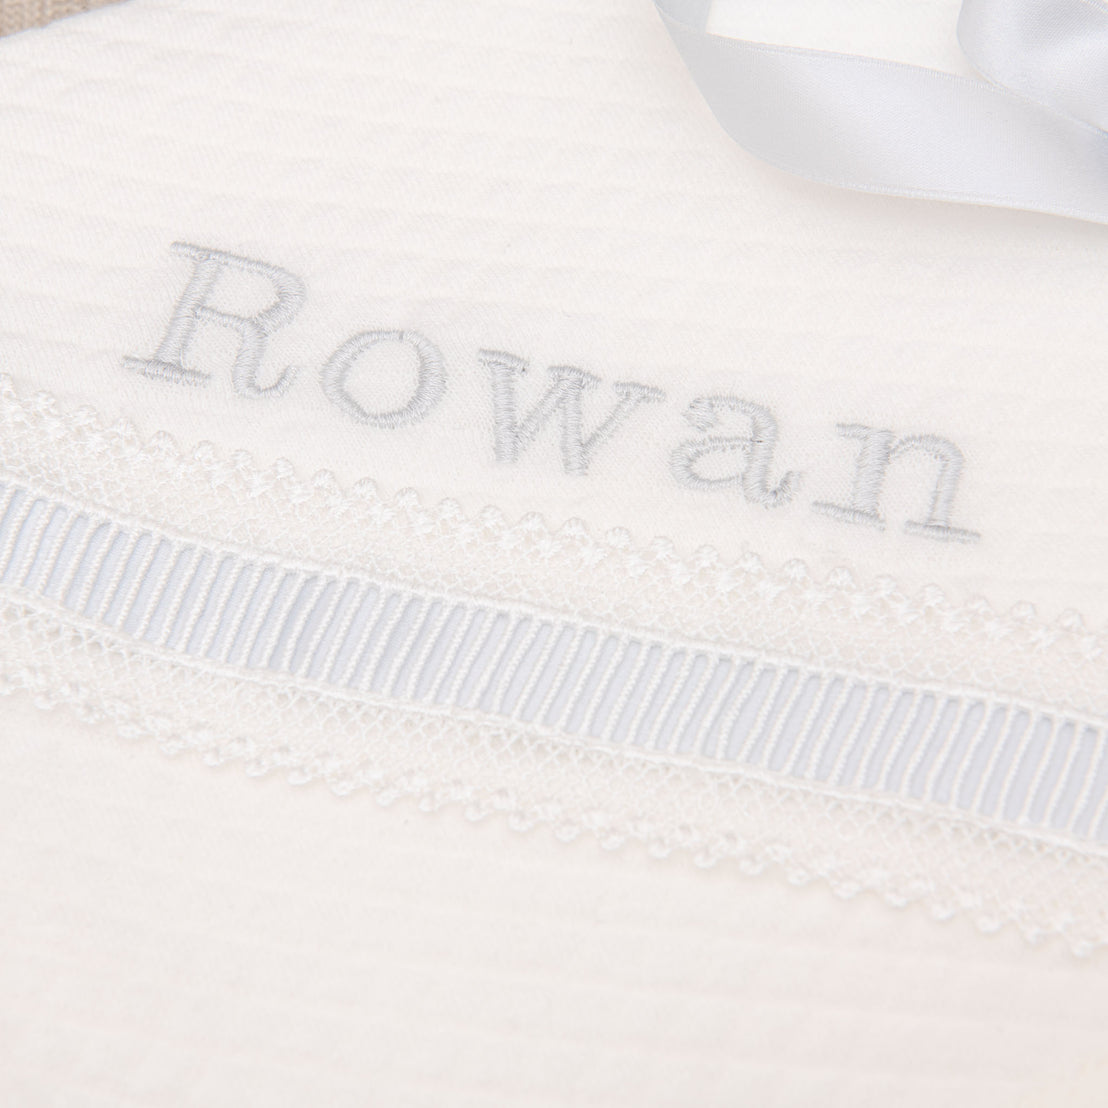 Close up detail of the embroidery on the Rowan personalized baby blanket.